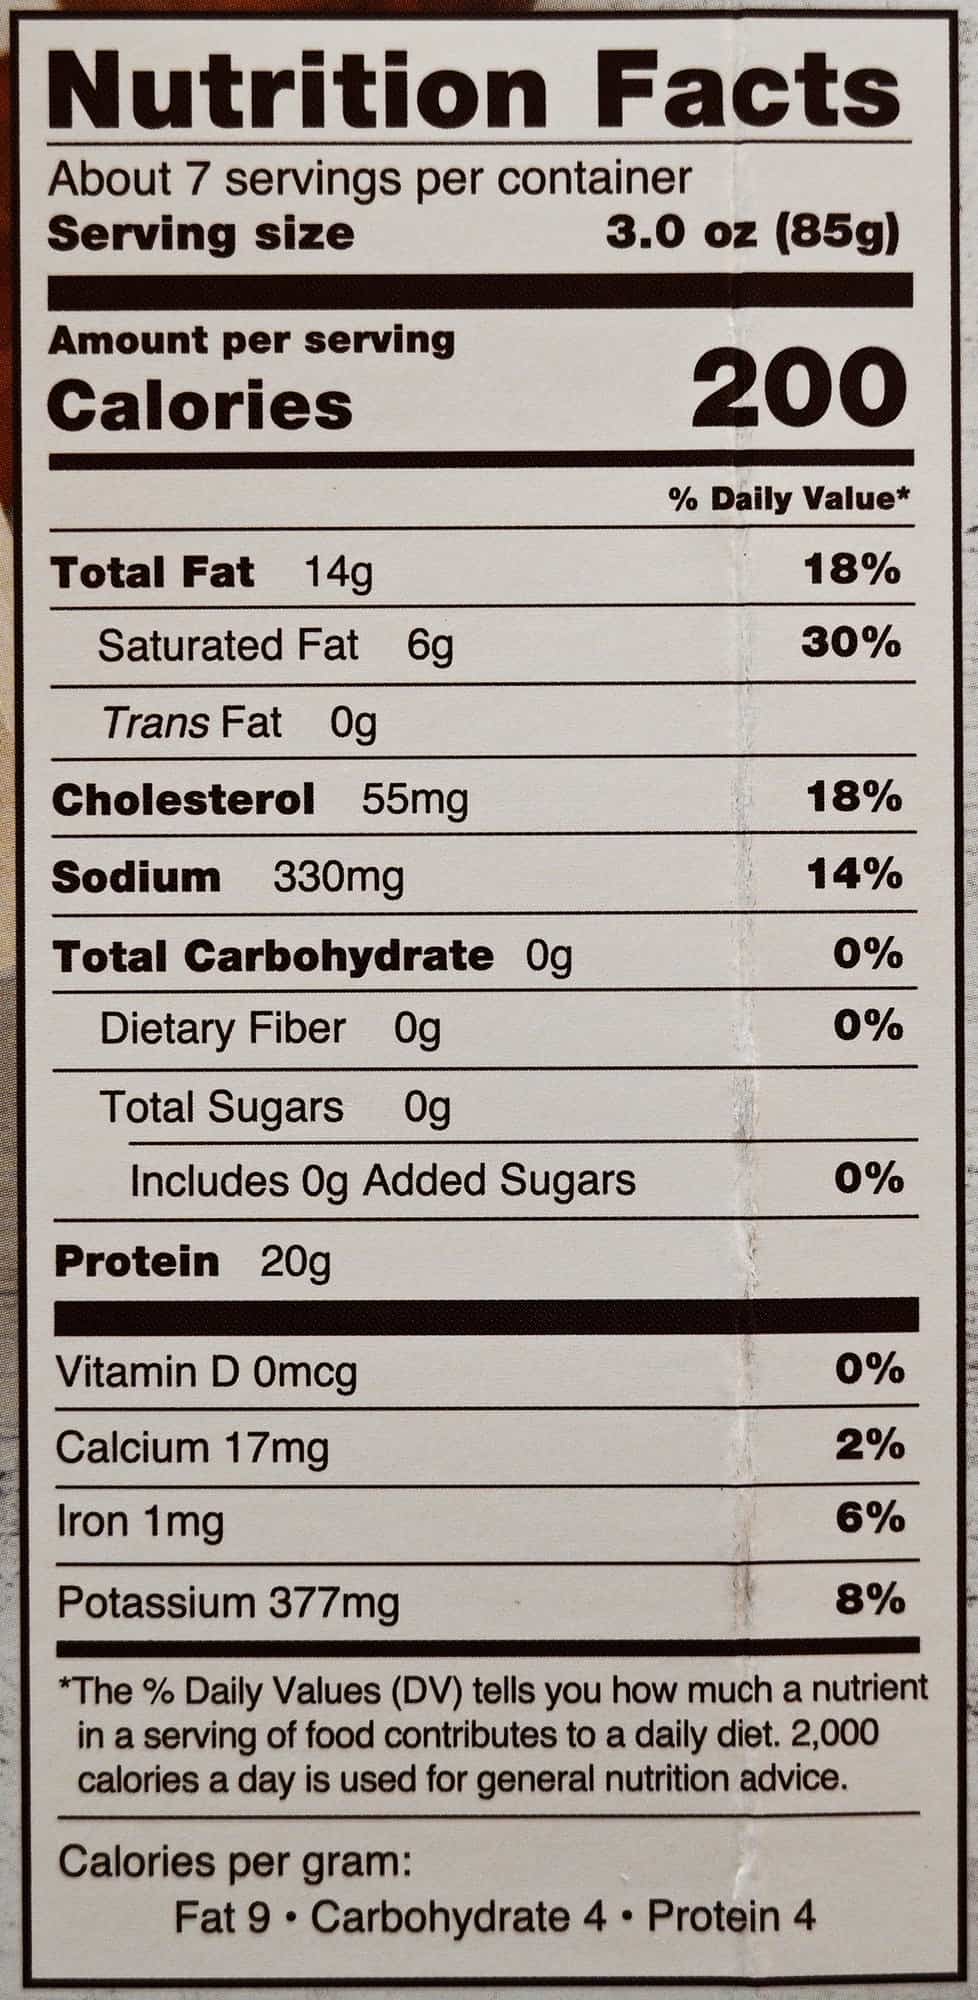 Image of the nutrition facts from the back of the package.